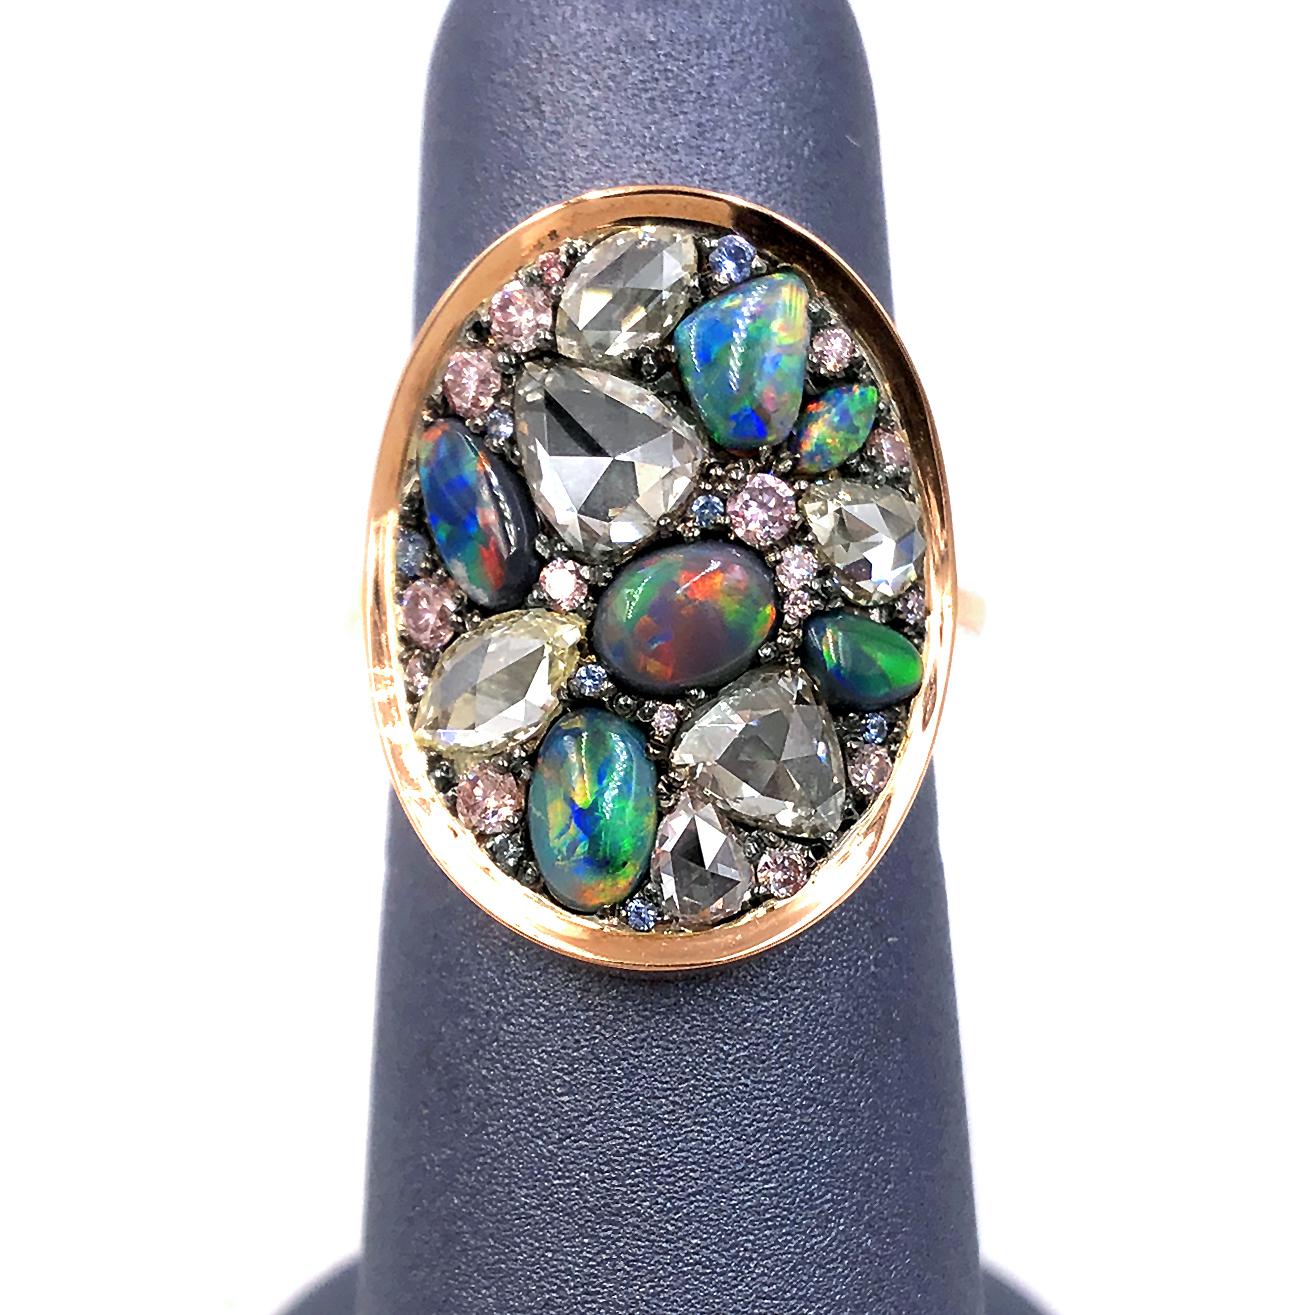 One of a Kind Starstruck Ring handcrafted in Belgium by jewelry maker Joke Quick in high-polished 18k rose gold featuring a curved oval element in blackened sterling silver set with an assortment of spectacular natural gemstones, including